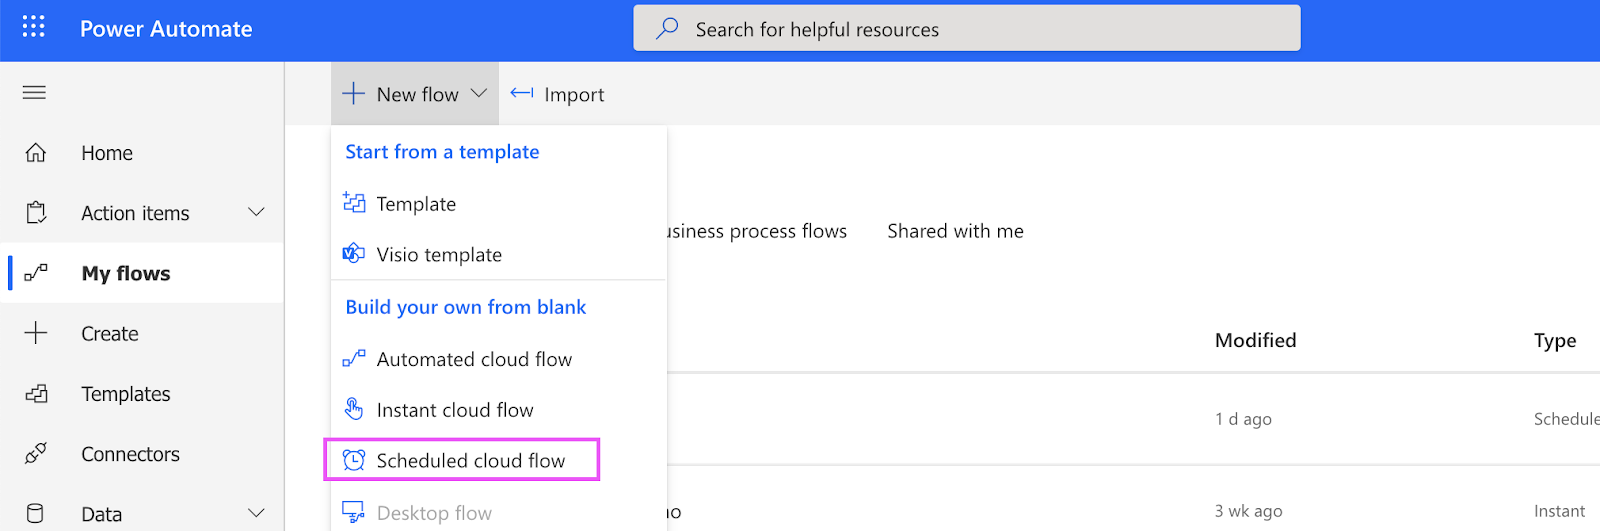 Screenshot showing how to add a new Power Automate flow